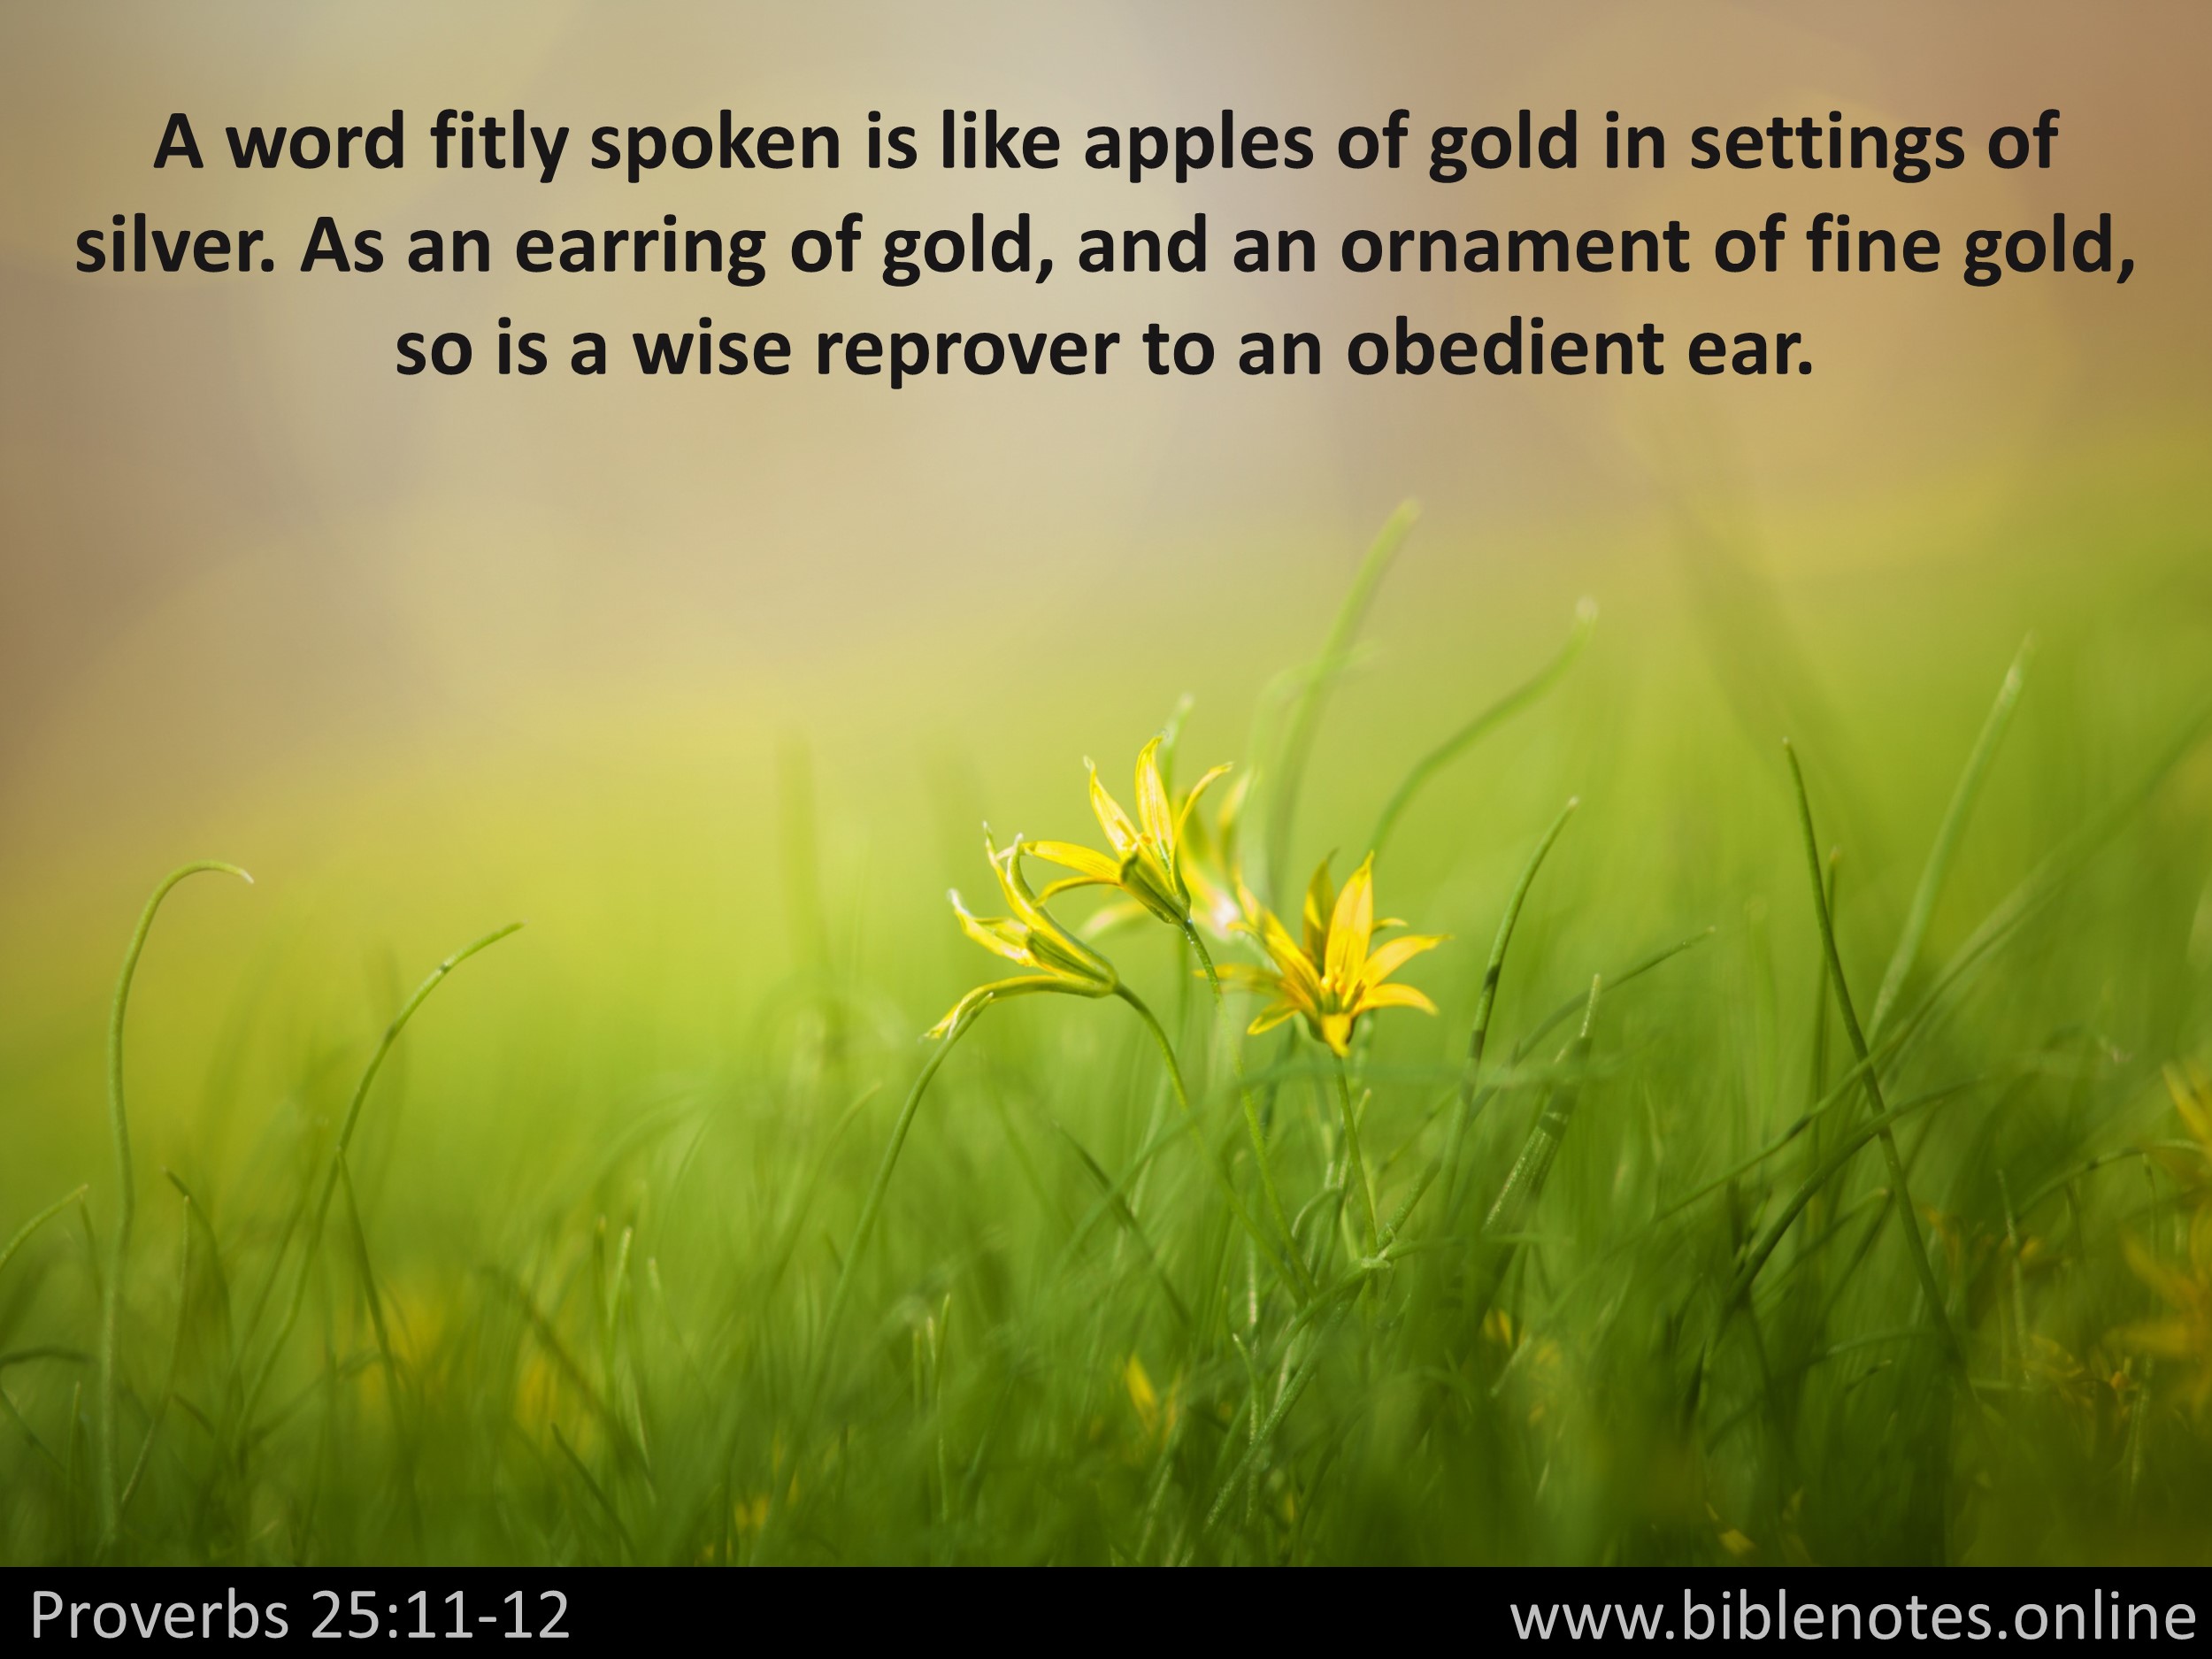 Bible Verse from Proverbs Chapter 25